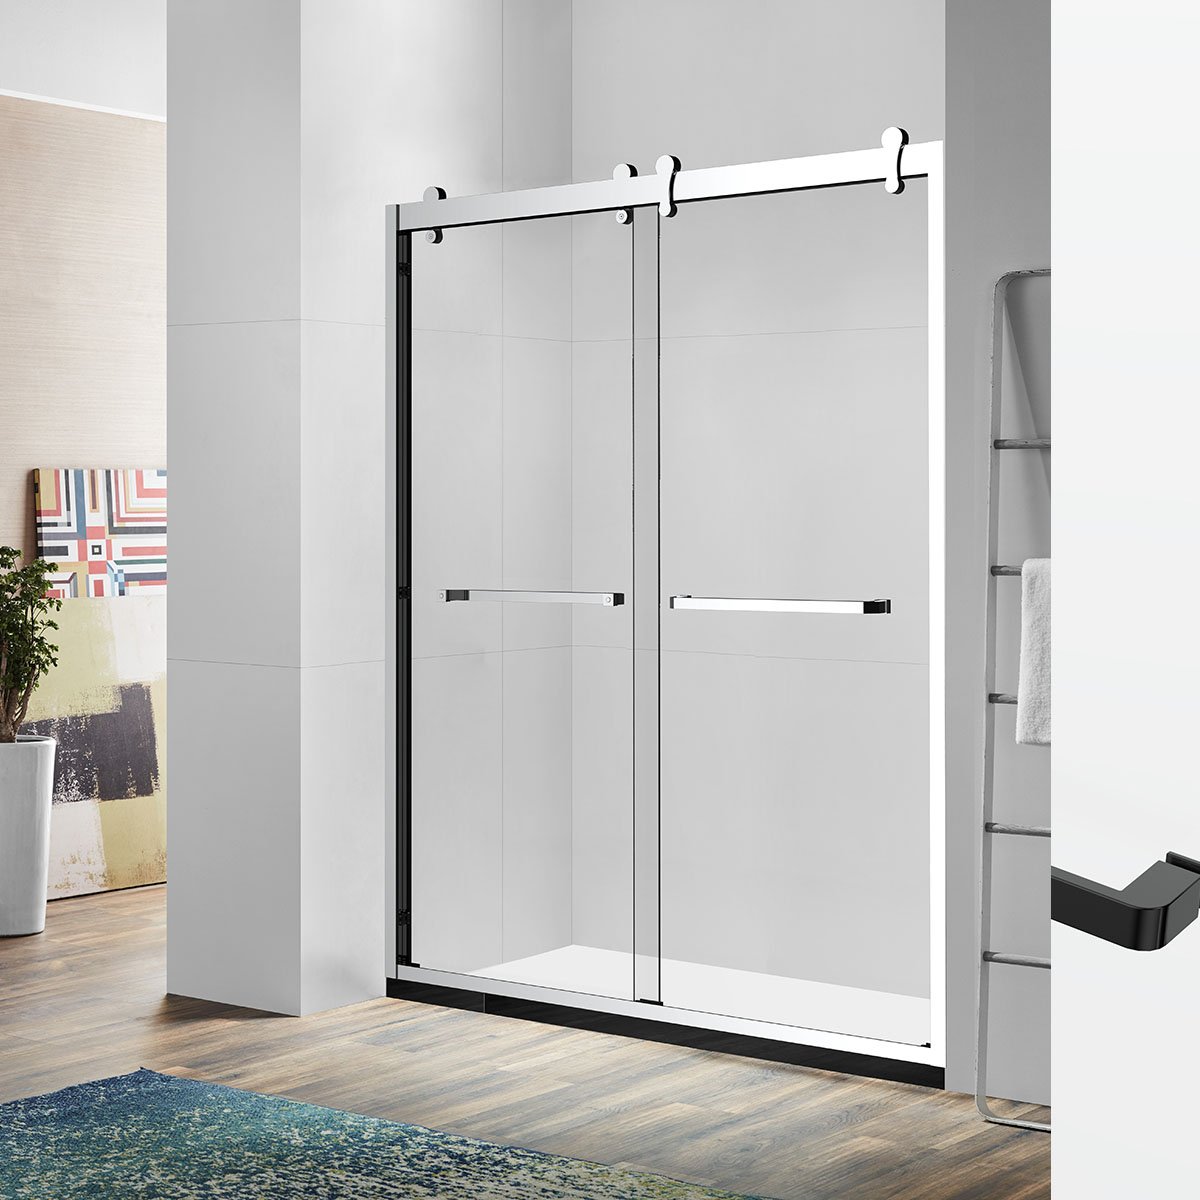 54" GBY22 Owen Bypass Series Shower Door with Klearteck Treatment (3/8" Thickness) (Brushed Nickel)